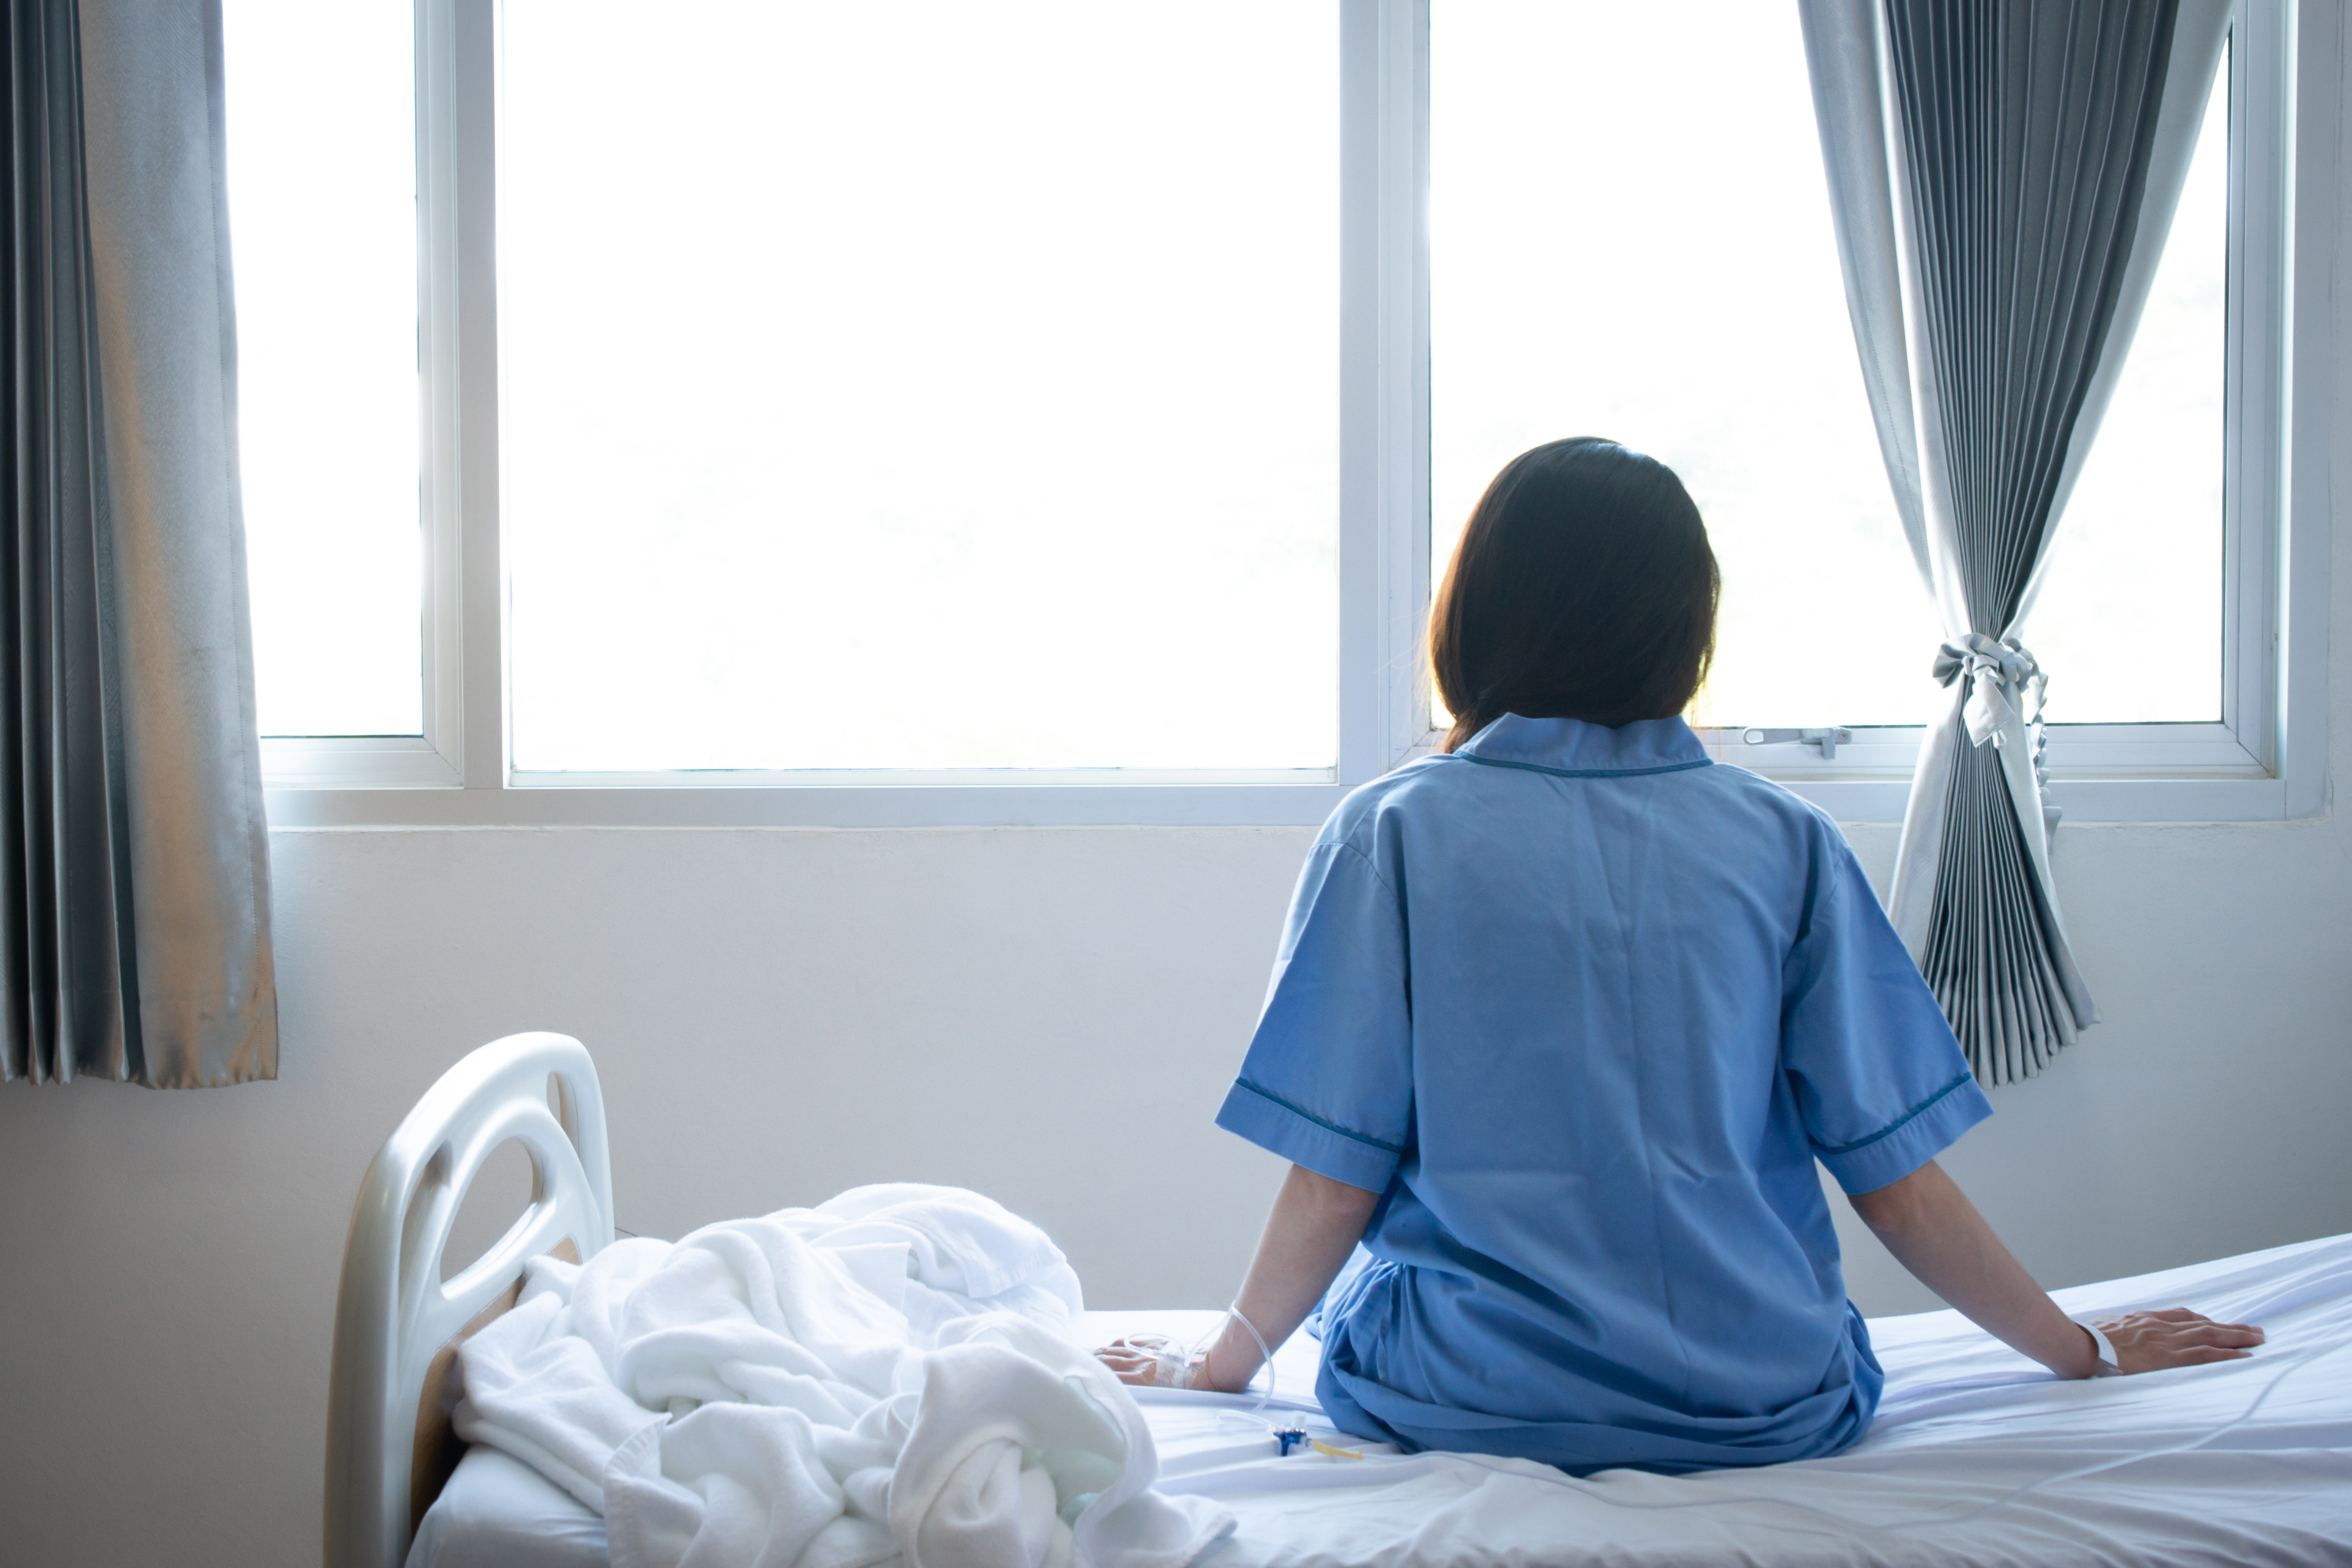 Life in A Psych Ward: What Are Mental Hospitals Like?